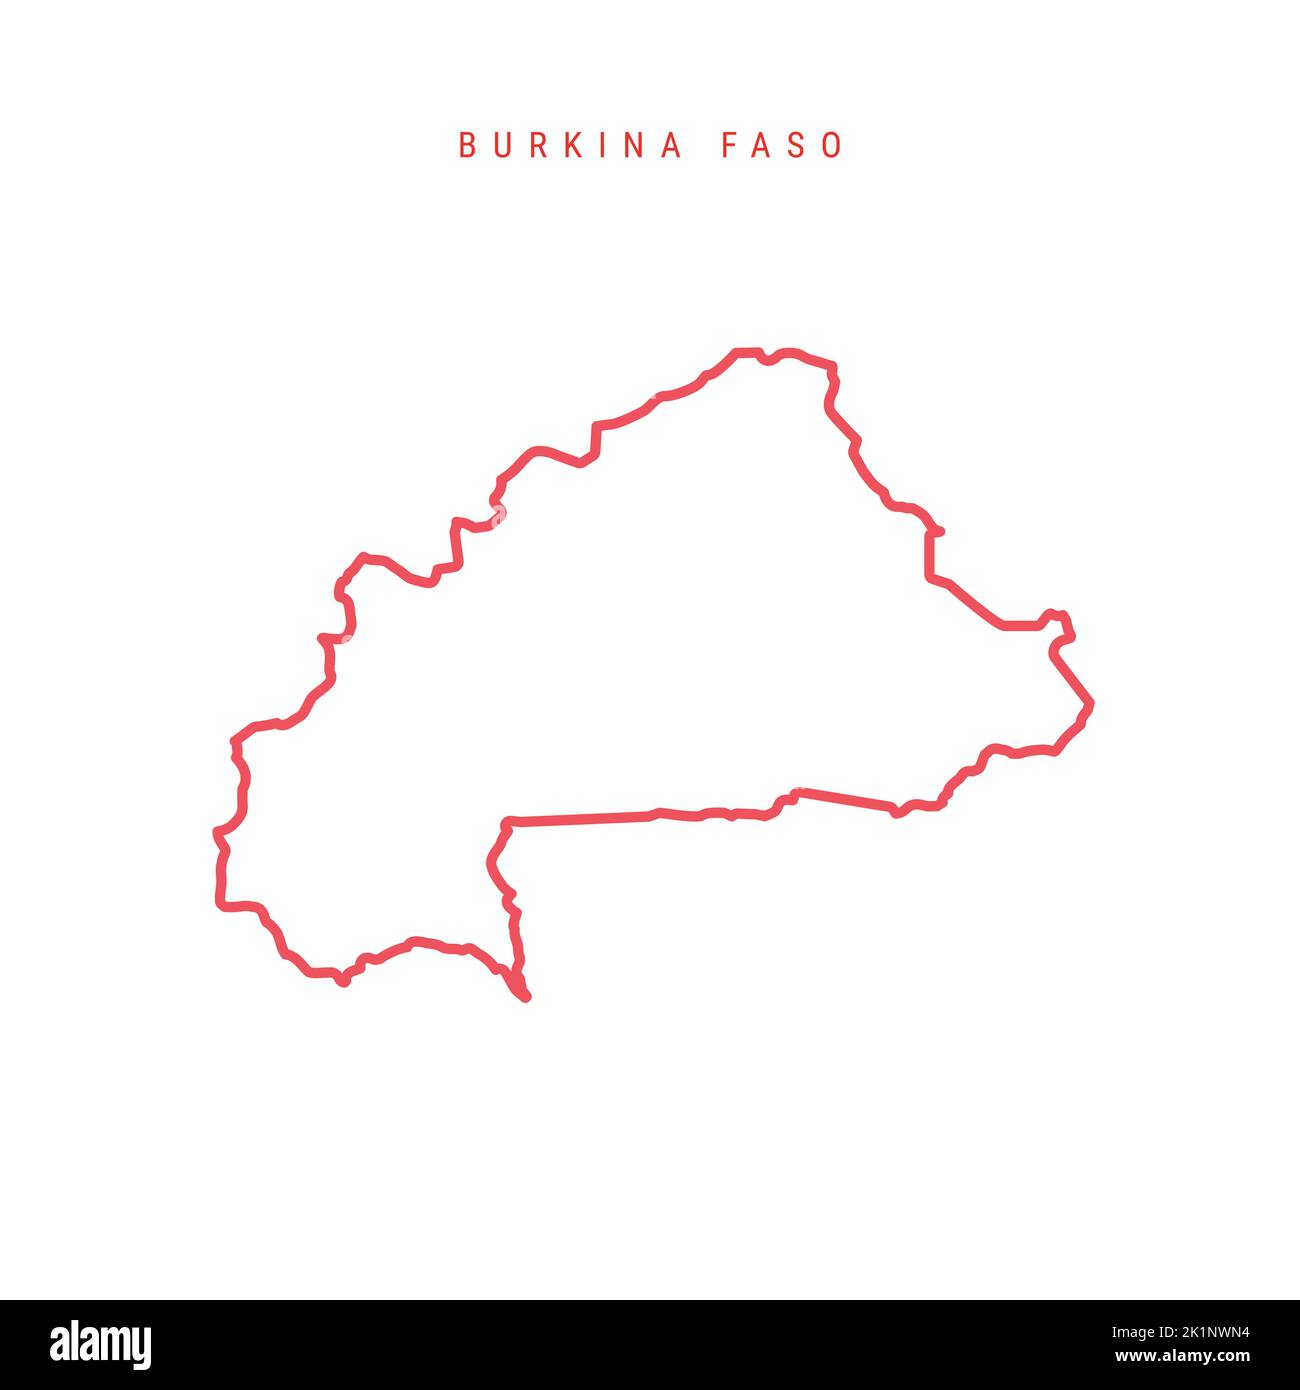 Burkina Faso editable outline map. Upper Volta red border. Country name. Adjust line weight. Change to any color. Vector illustration. Stock Vector